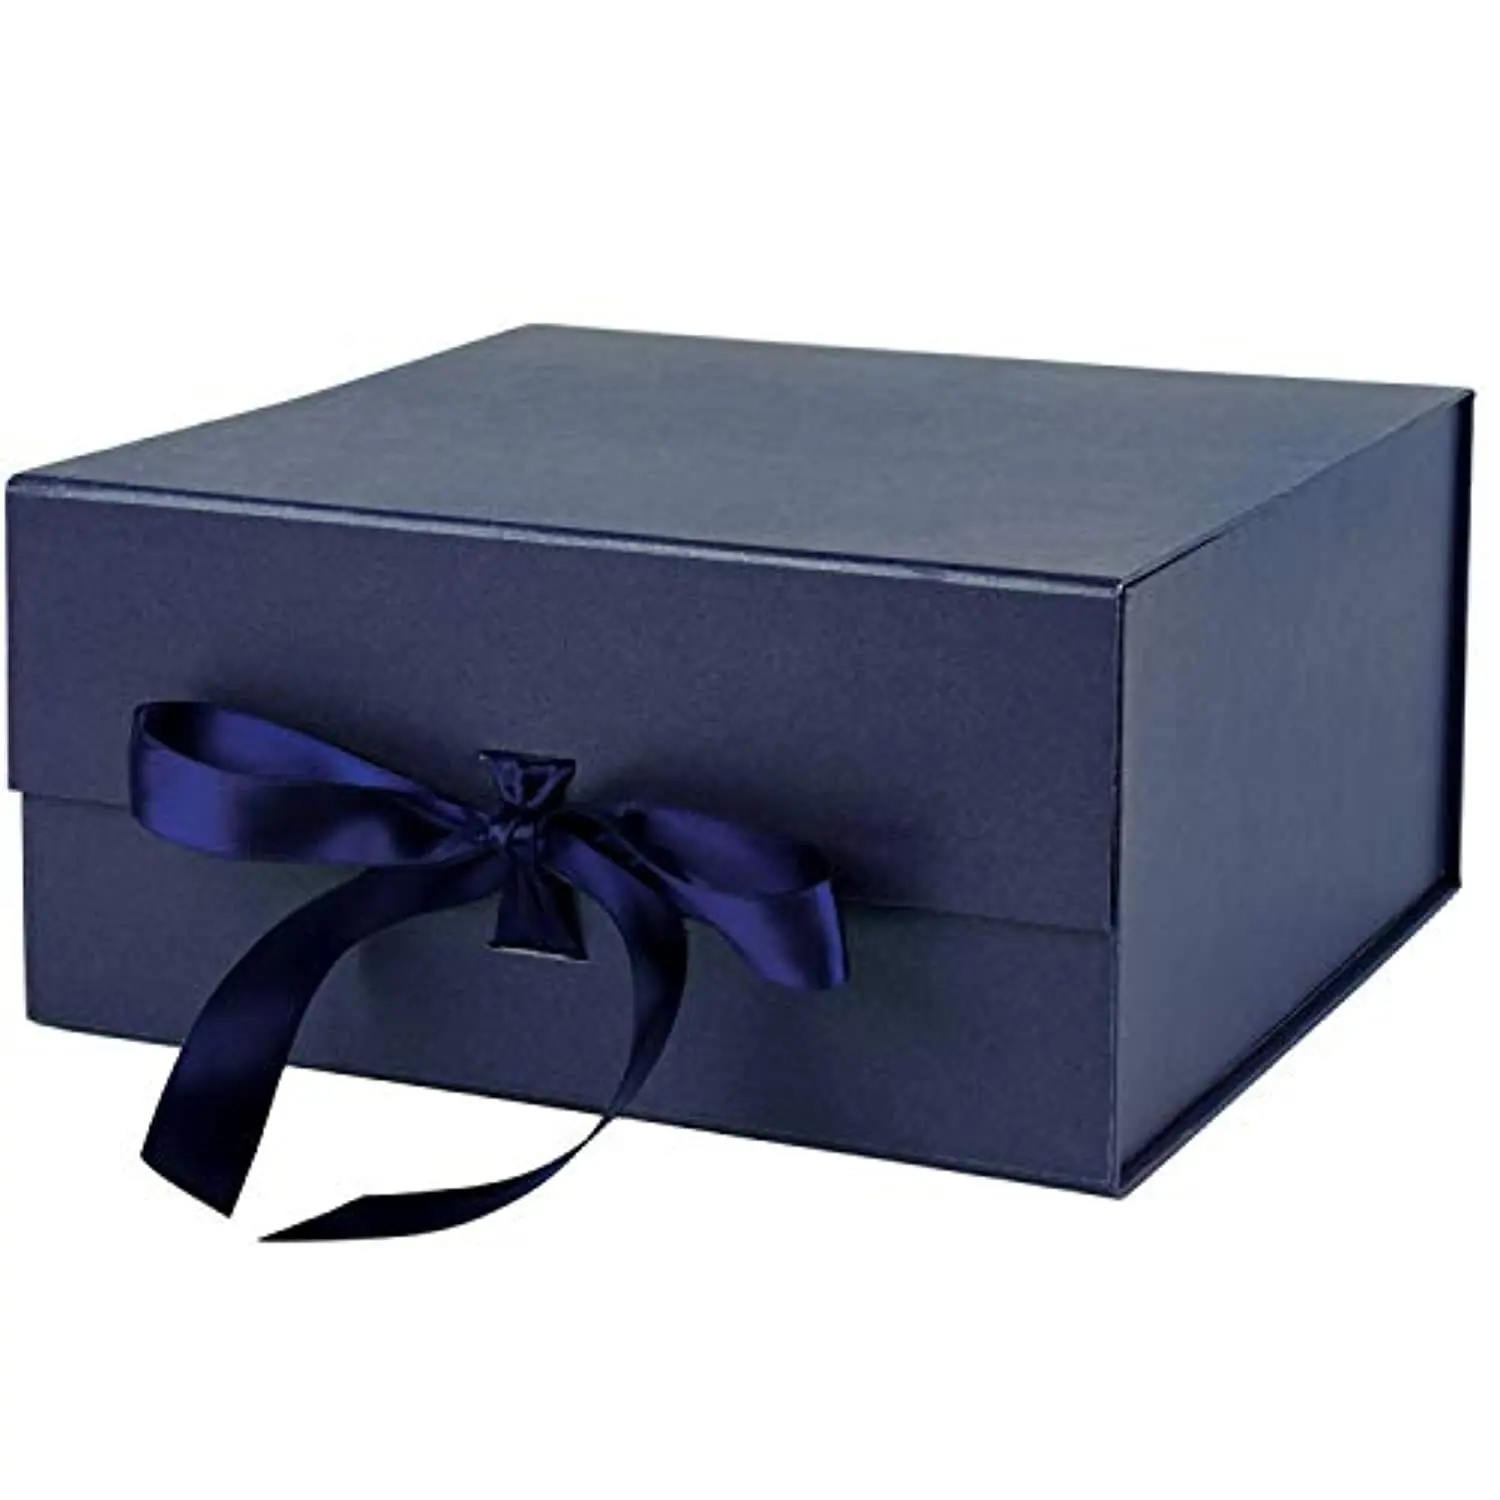 Foldable Magnetic hard top glossy boxes navy blue Royal Gift Packaging Favor Box Paper Navy Blue Boxes